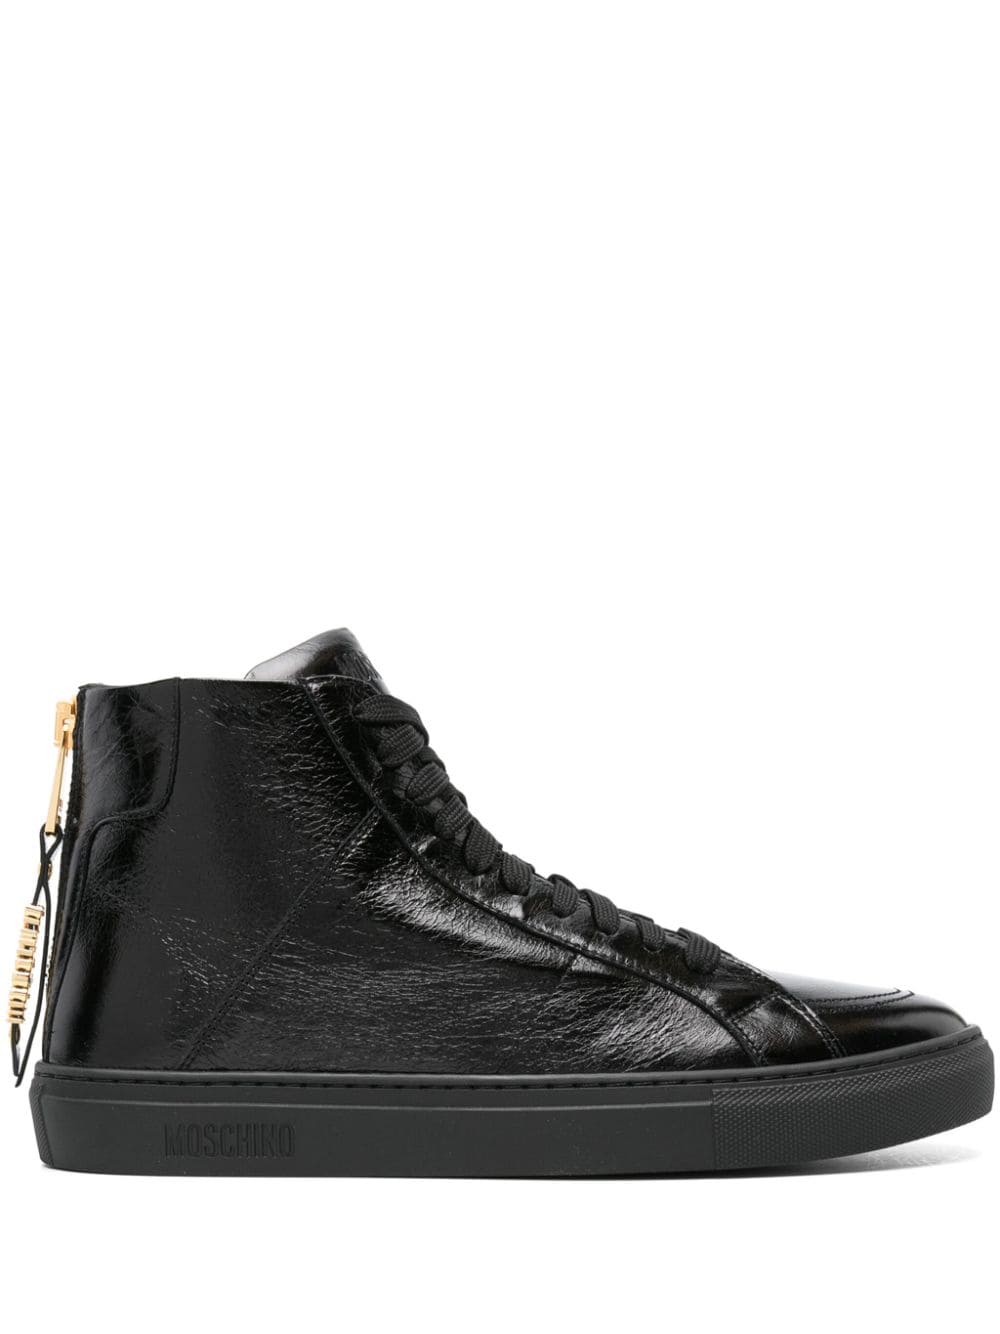 Moschino crinkled leather sneakers - Black von Moschino